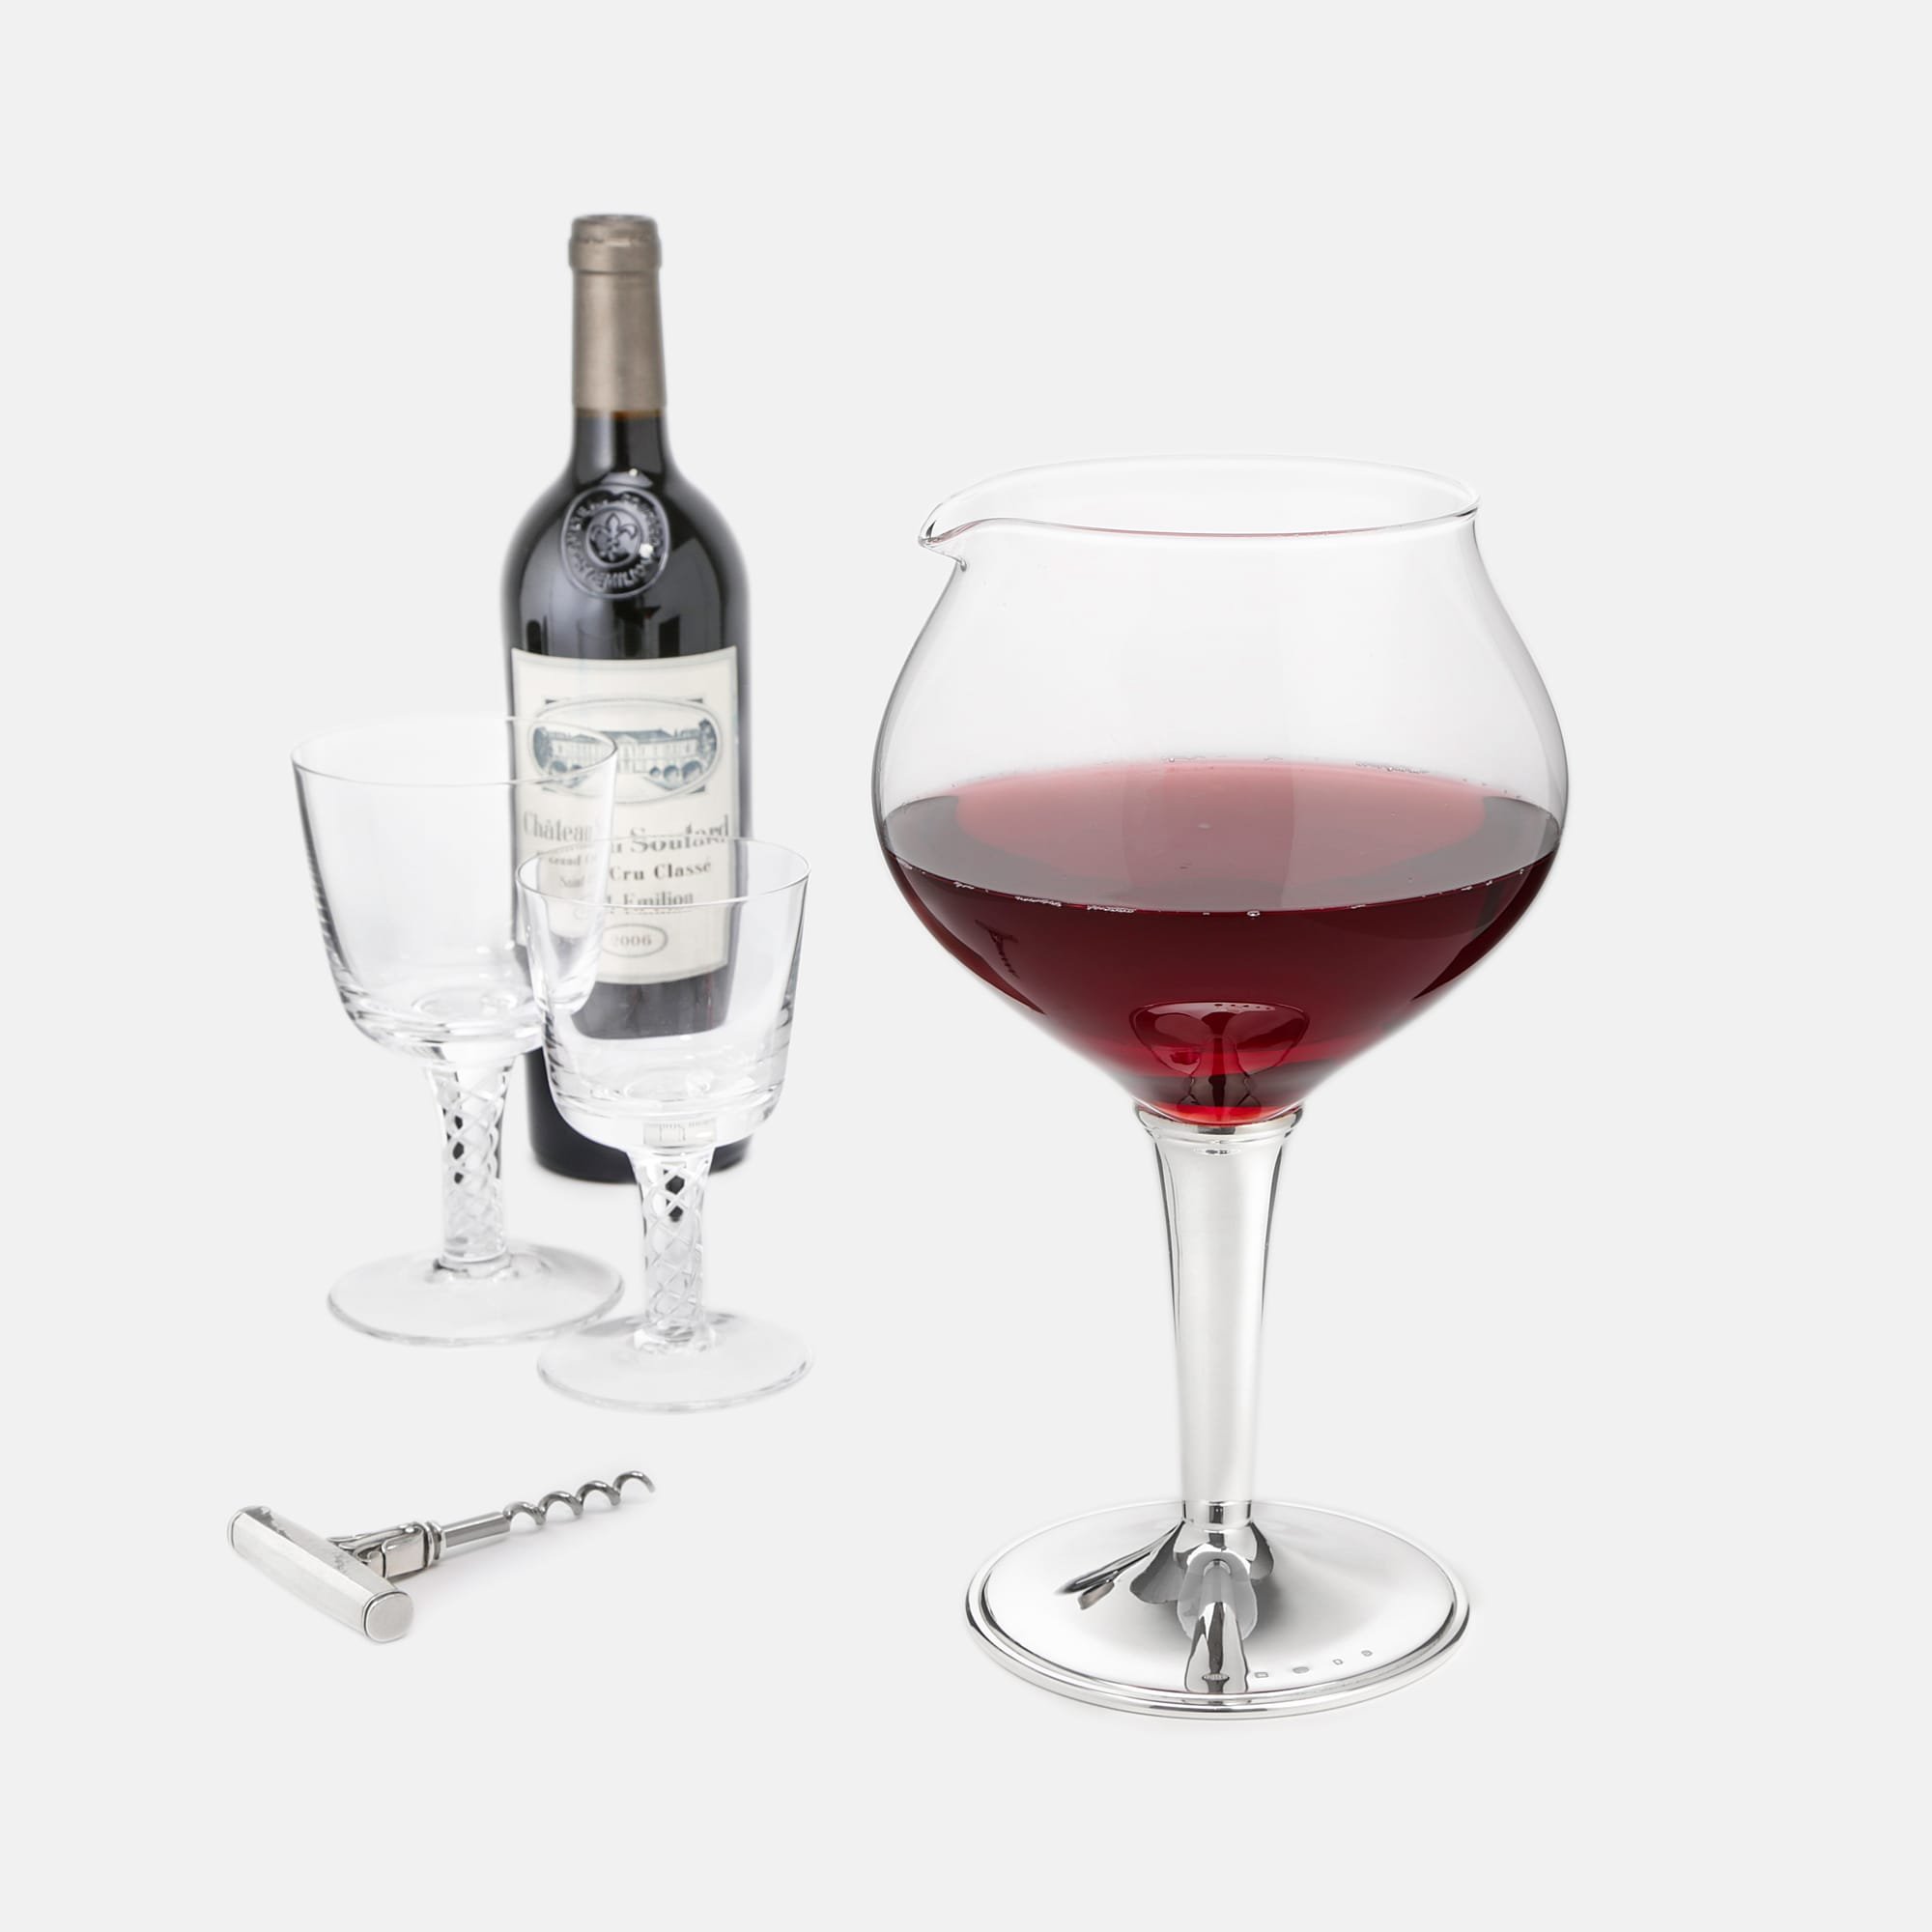 Silver & glass balloon wine decanter - exclusive to Langfords